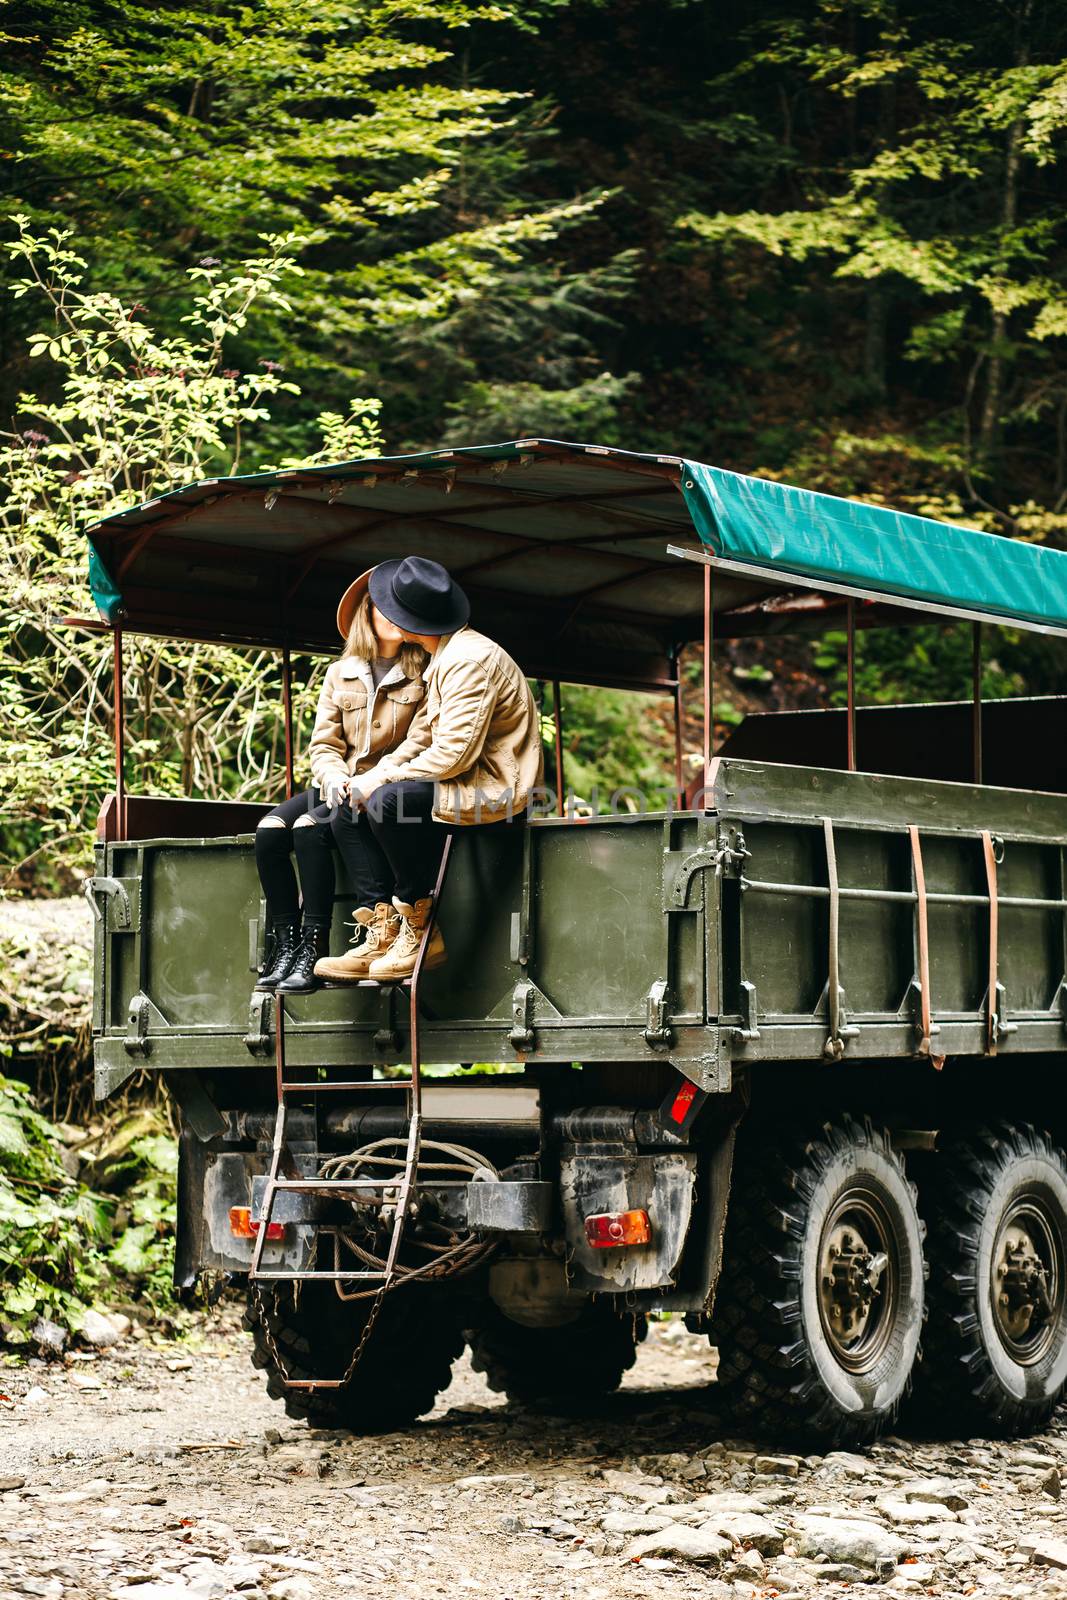 A beautiful girl and a handsome man in military truck. Lovestory. Military vehicle. Military fashion.Carpathian mountains by Denys_N